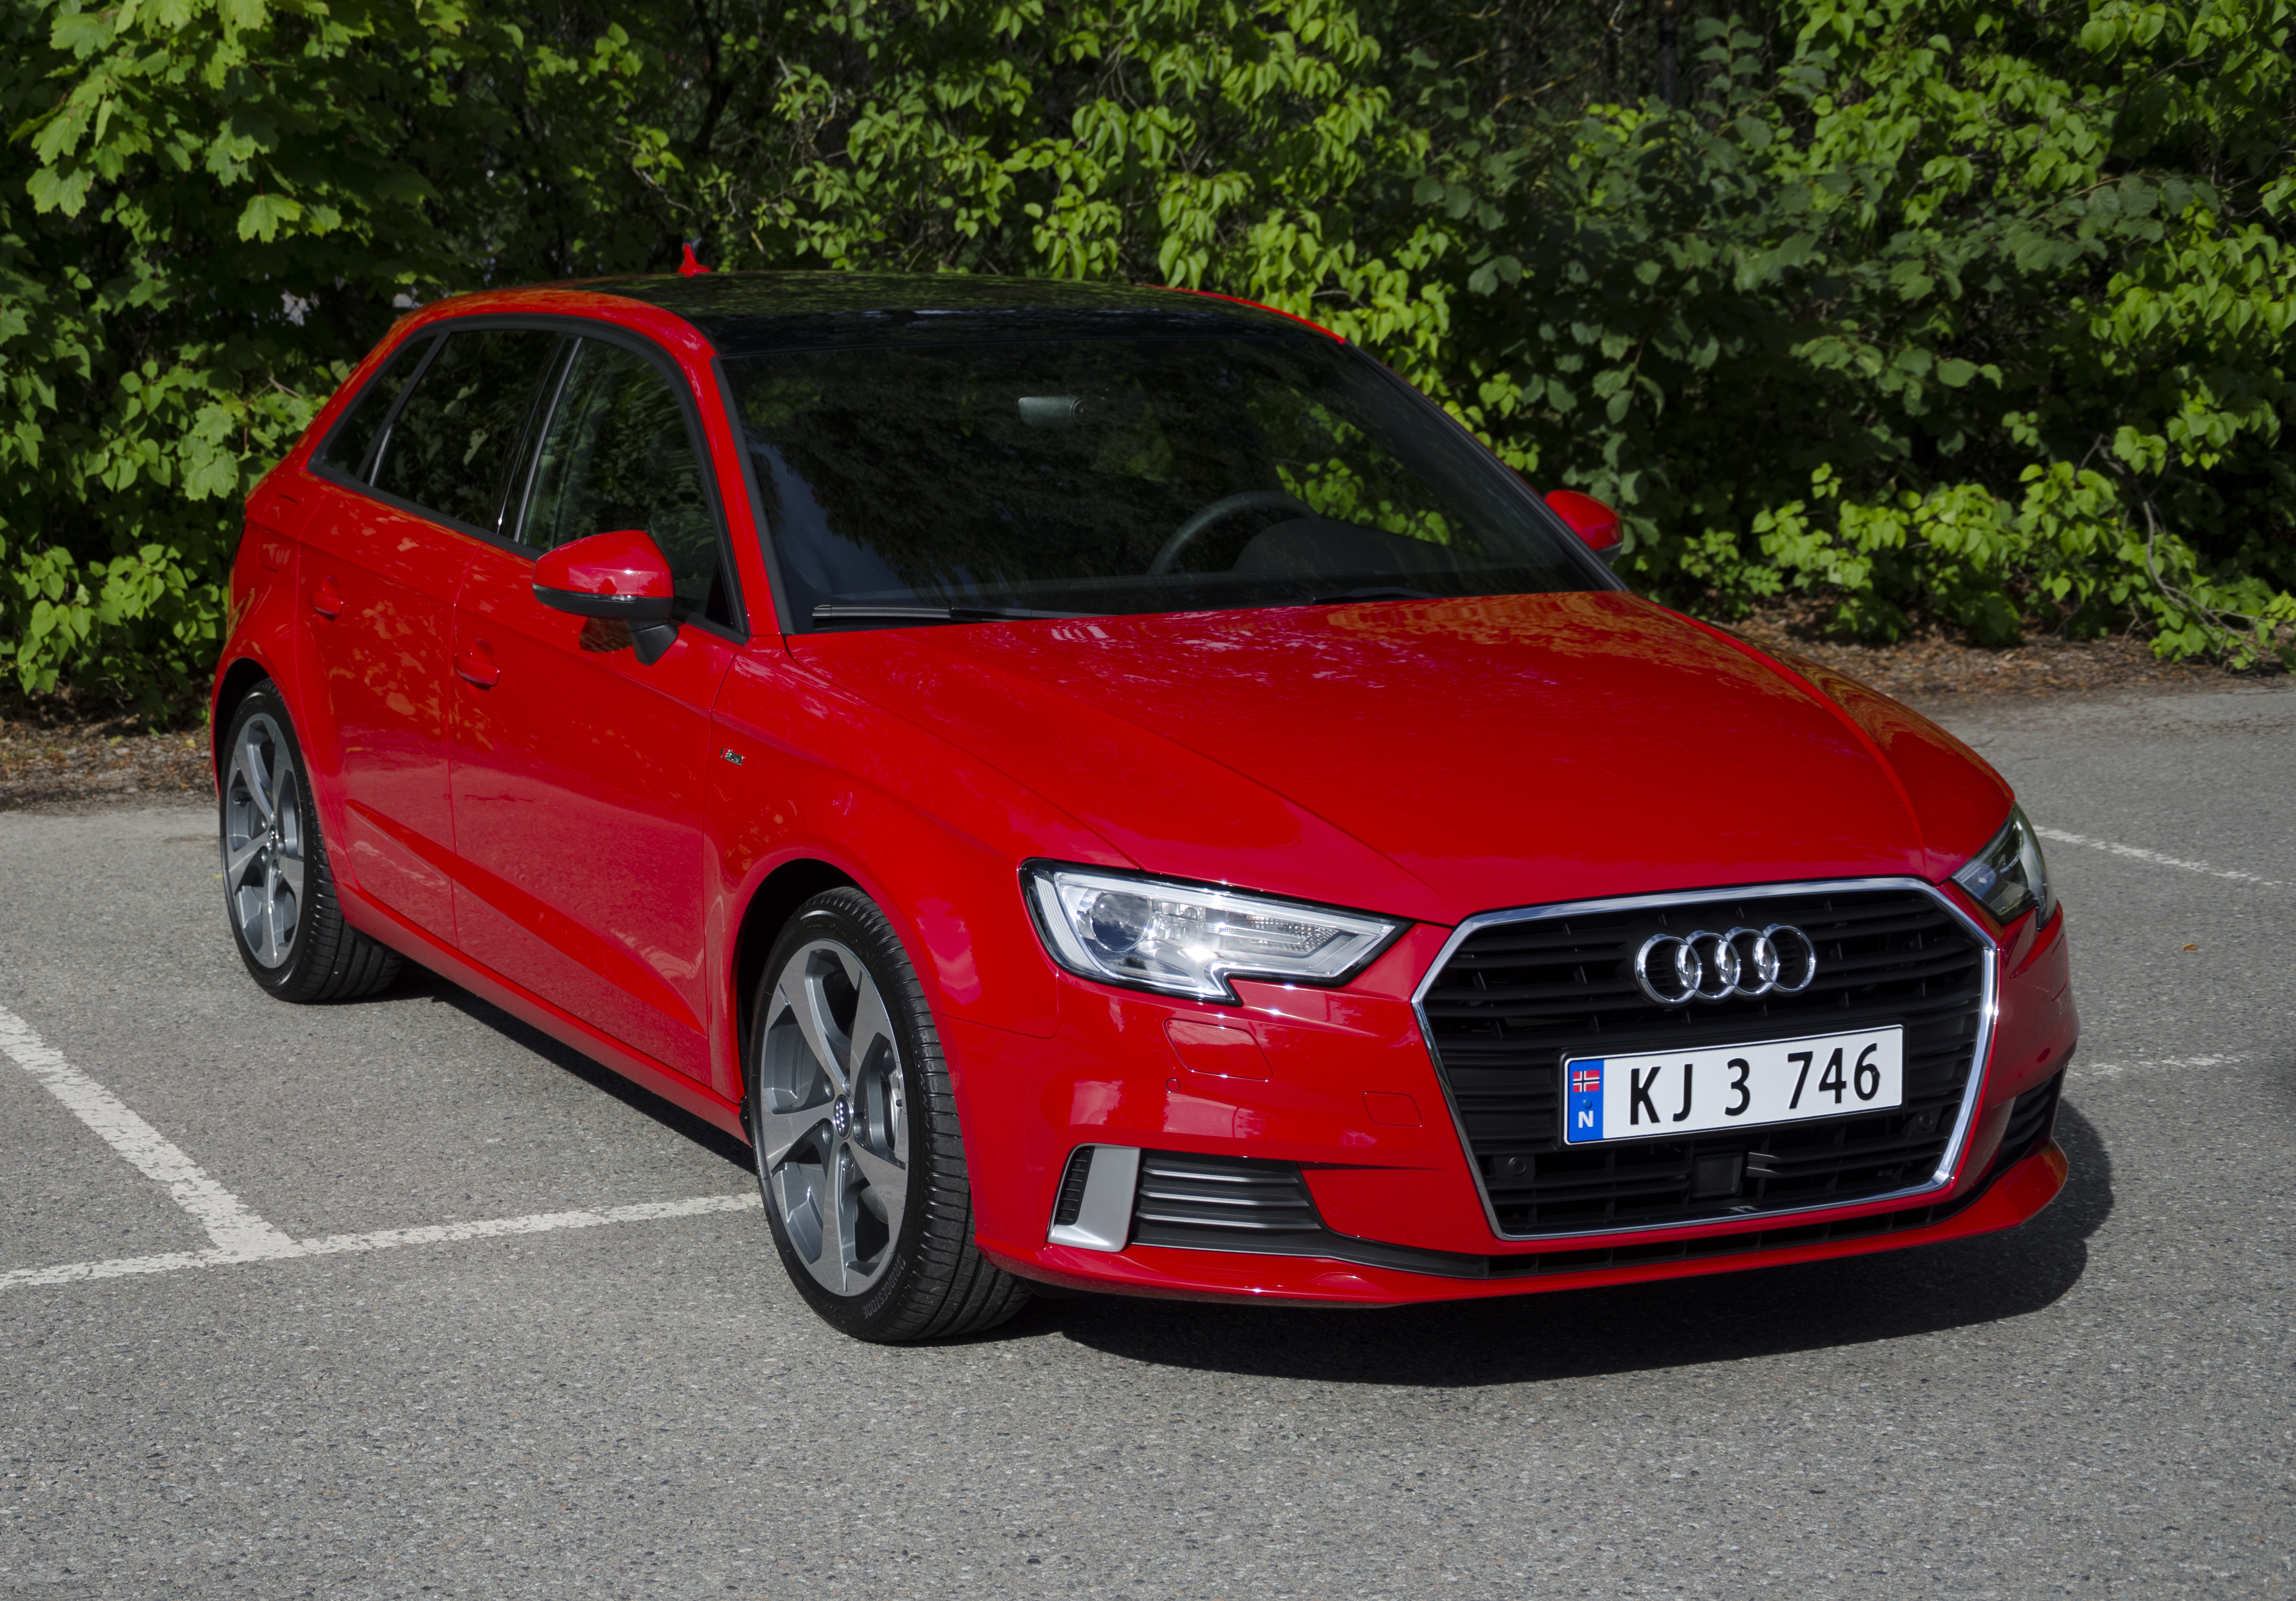 new red Audi hatchback front view